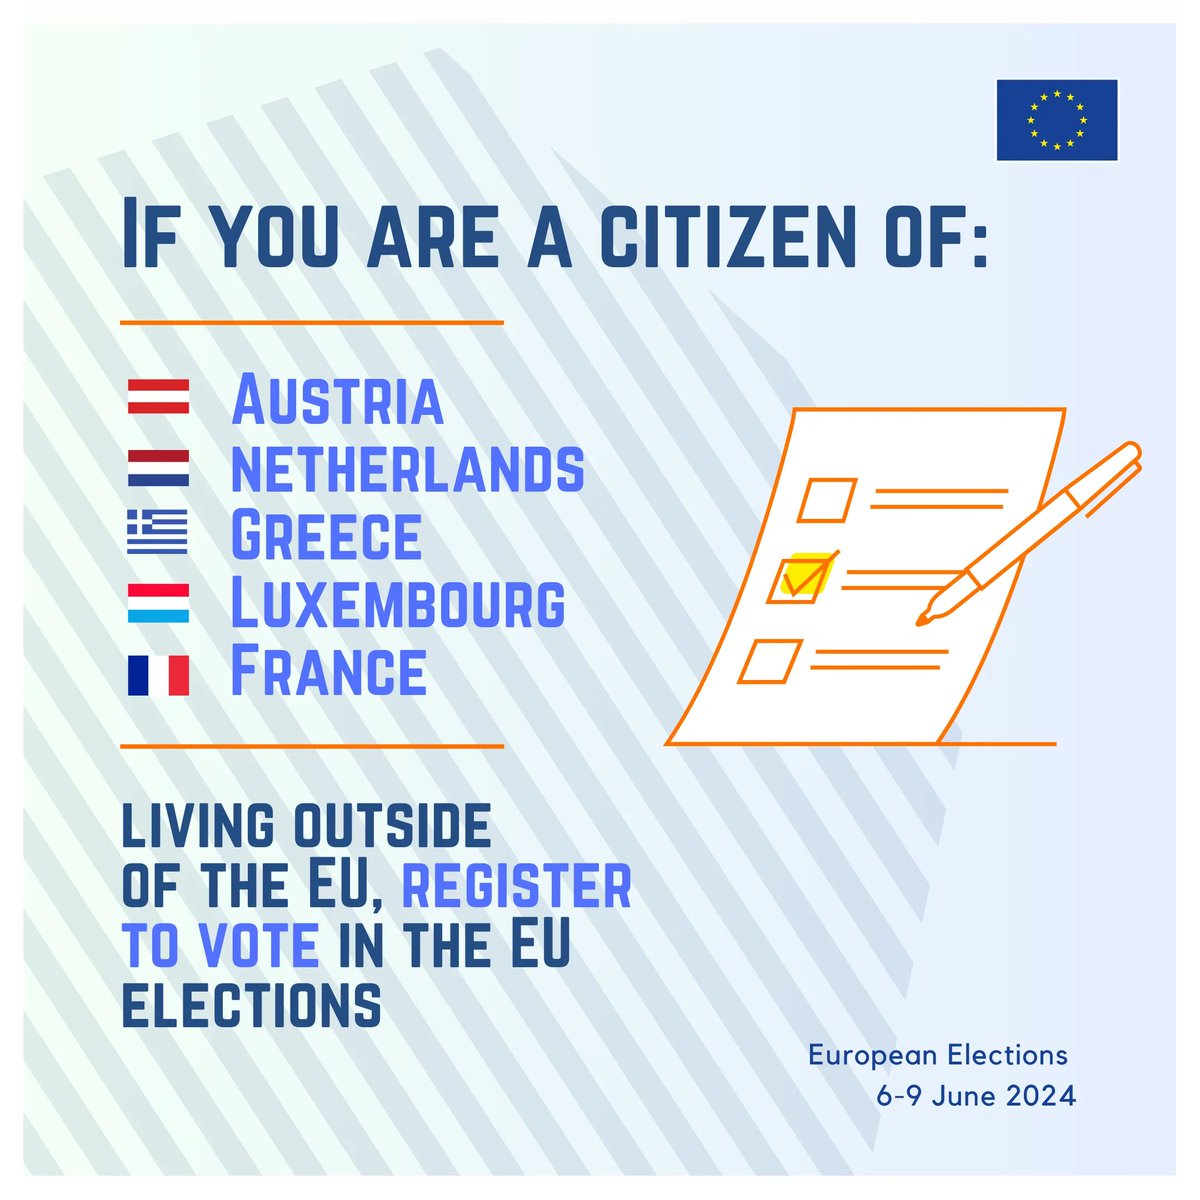 🗳️ If you live outside of the EU, you can #UseYourVote, too. Make sure that you register – here are the upcoming deadlines: 🇦🇹 Austria: 25/04 🇳🇱 Netherlands: 25/04 🇬🇷 Greece: 29/04 🇱🇺 Luxembourg: 30/04 🇫🇷 France: 03/05 europa.eu/!bnhXDQ